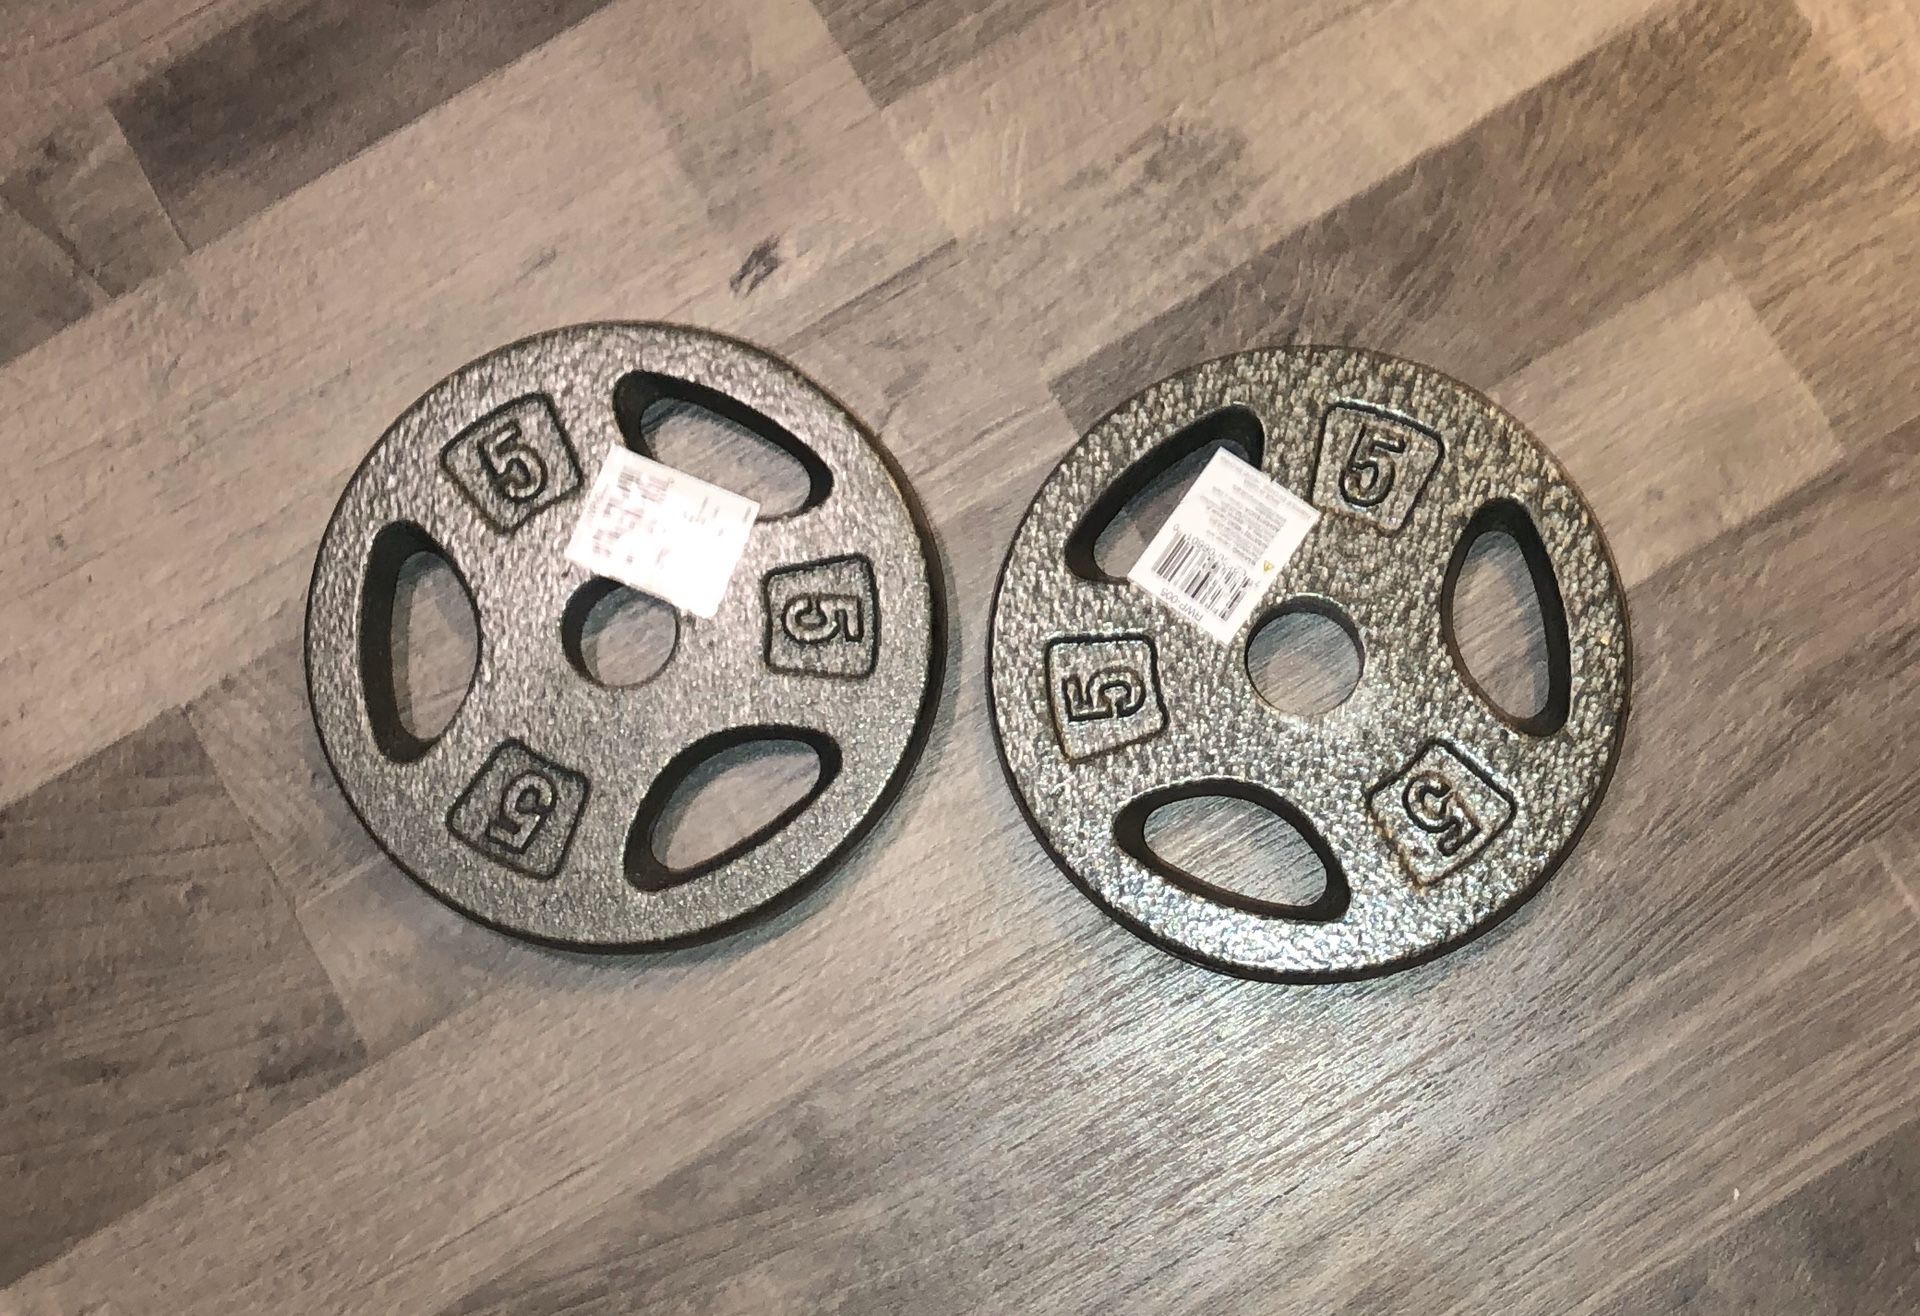 Pair of 5lb barbell plates (1”)